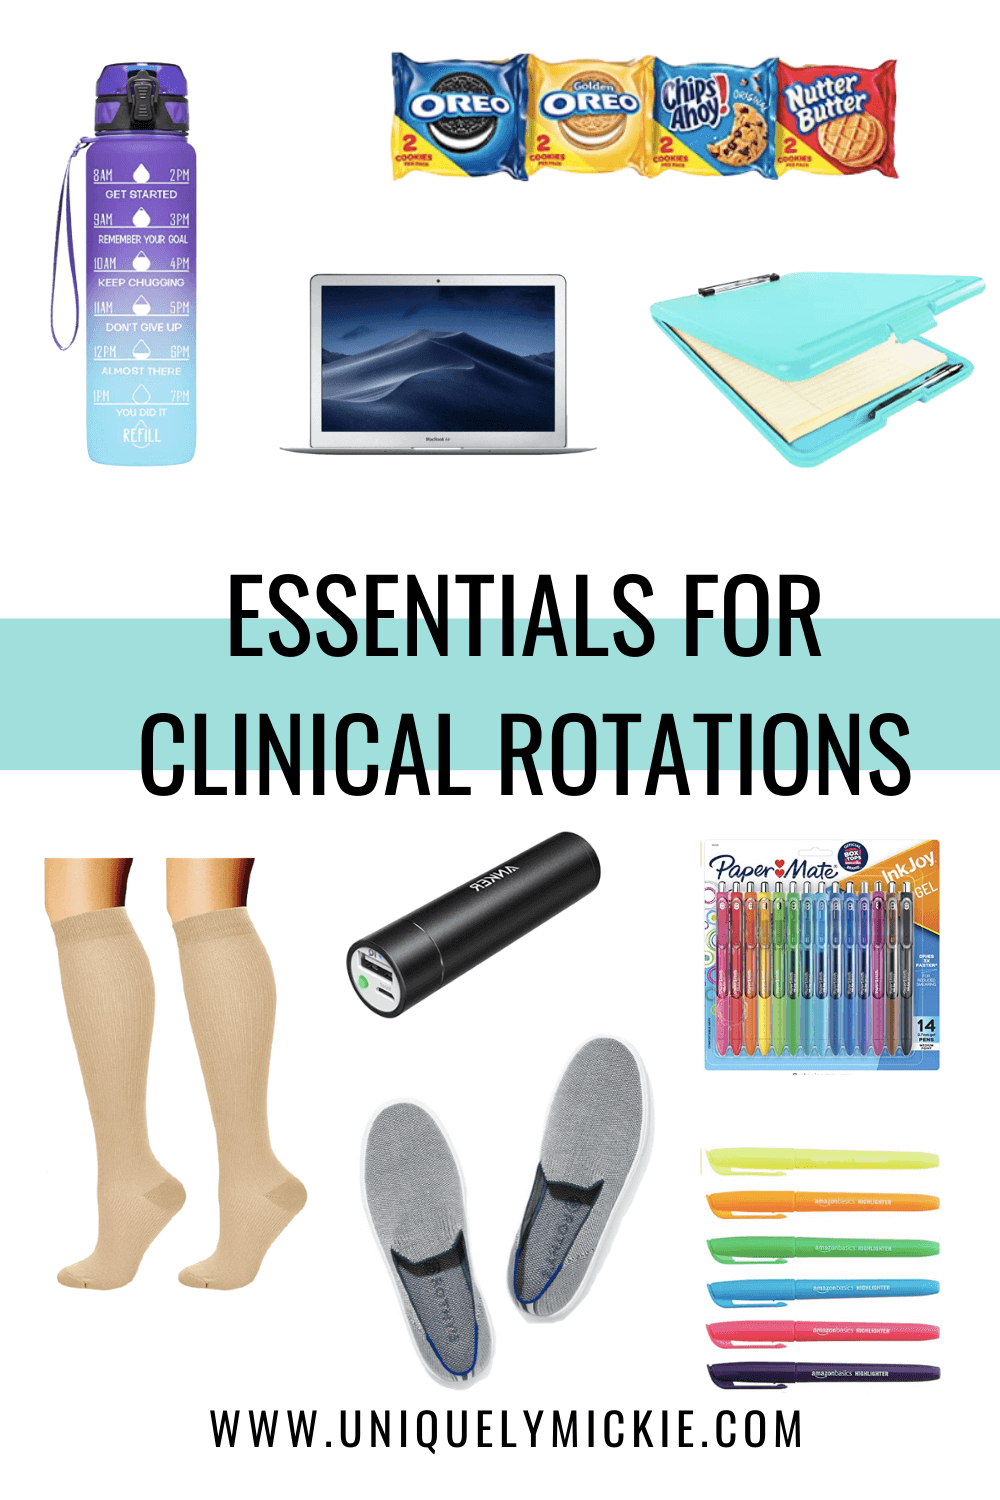 In this post, I’m sharing my clinical rotation essentials, which includes everything that I used to carry when I was on rotation in pharmacy school (works for medical school too!).